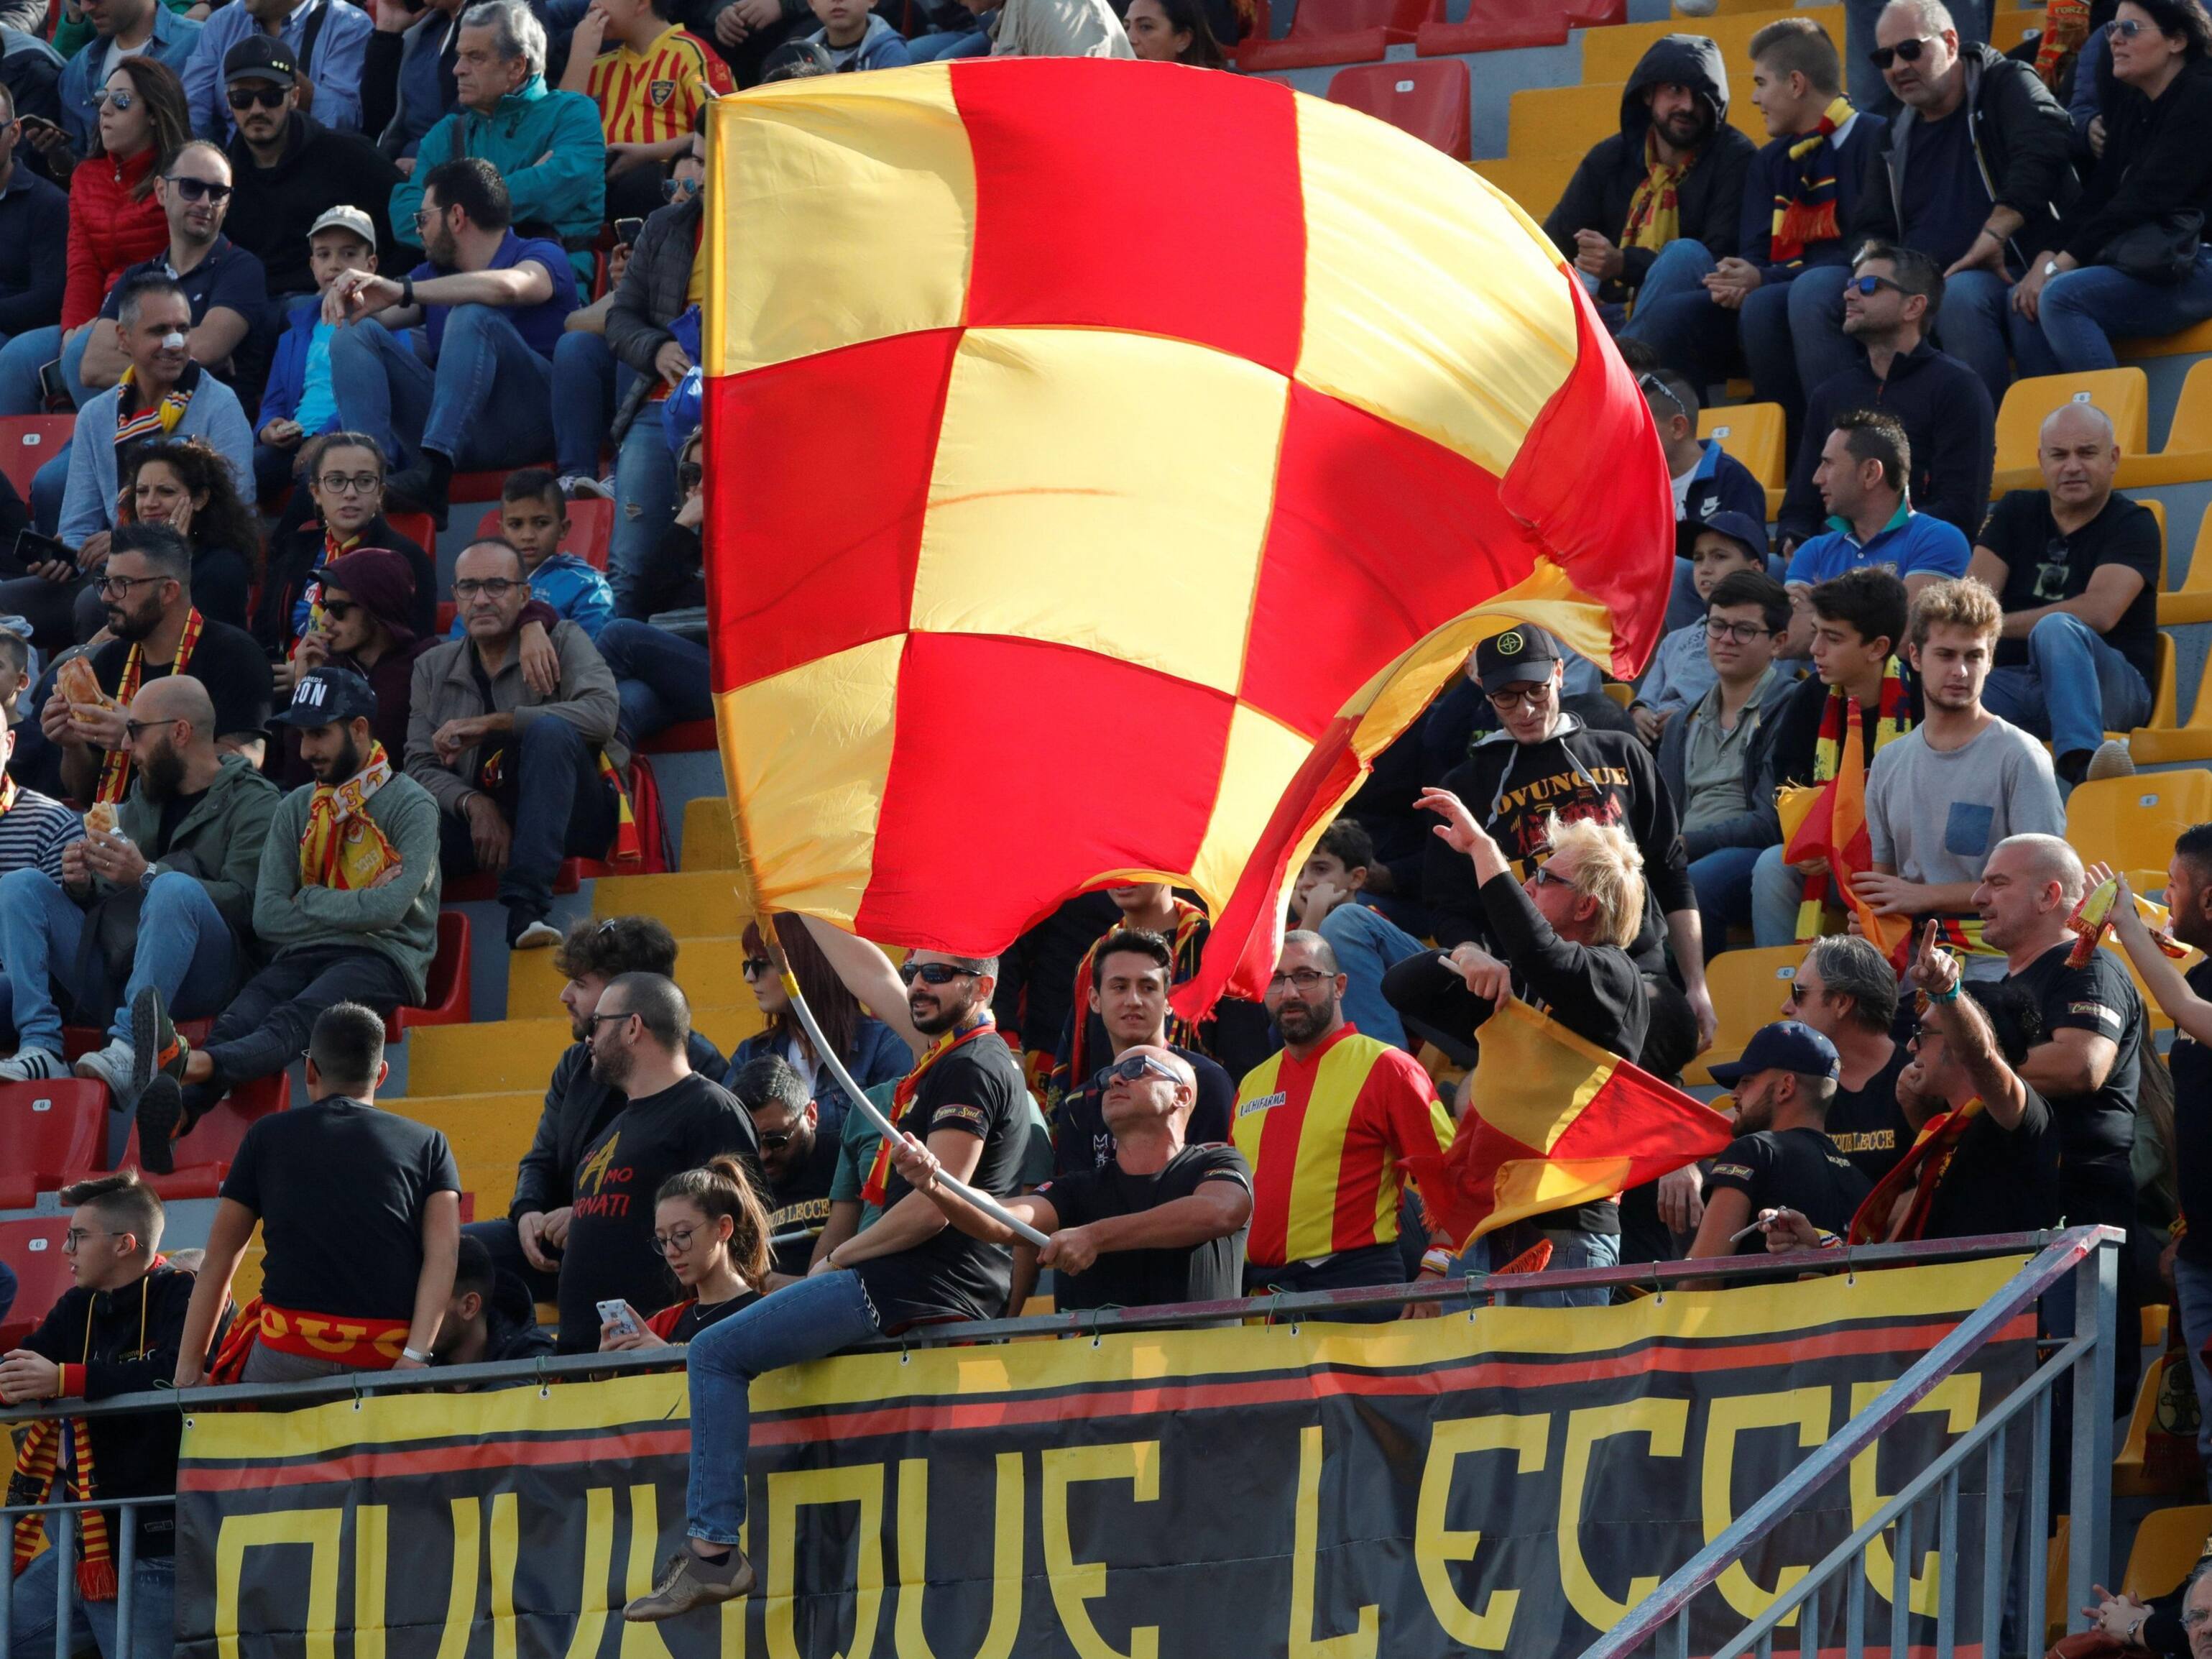 Soccer Football - Serie A - Lecce v Juventus - Stadio Via del Mare, Lecce, Italy - October 26, 2019 Lecce fans wave a flag inside the stadium before the match REUTERS/Ciro De Luca - Image ID: 2CM0852